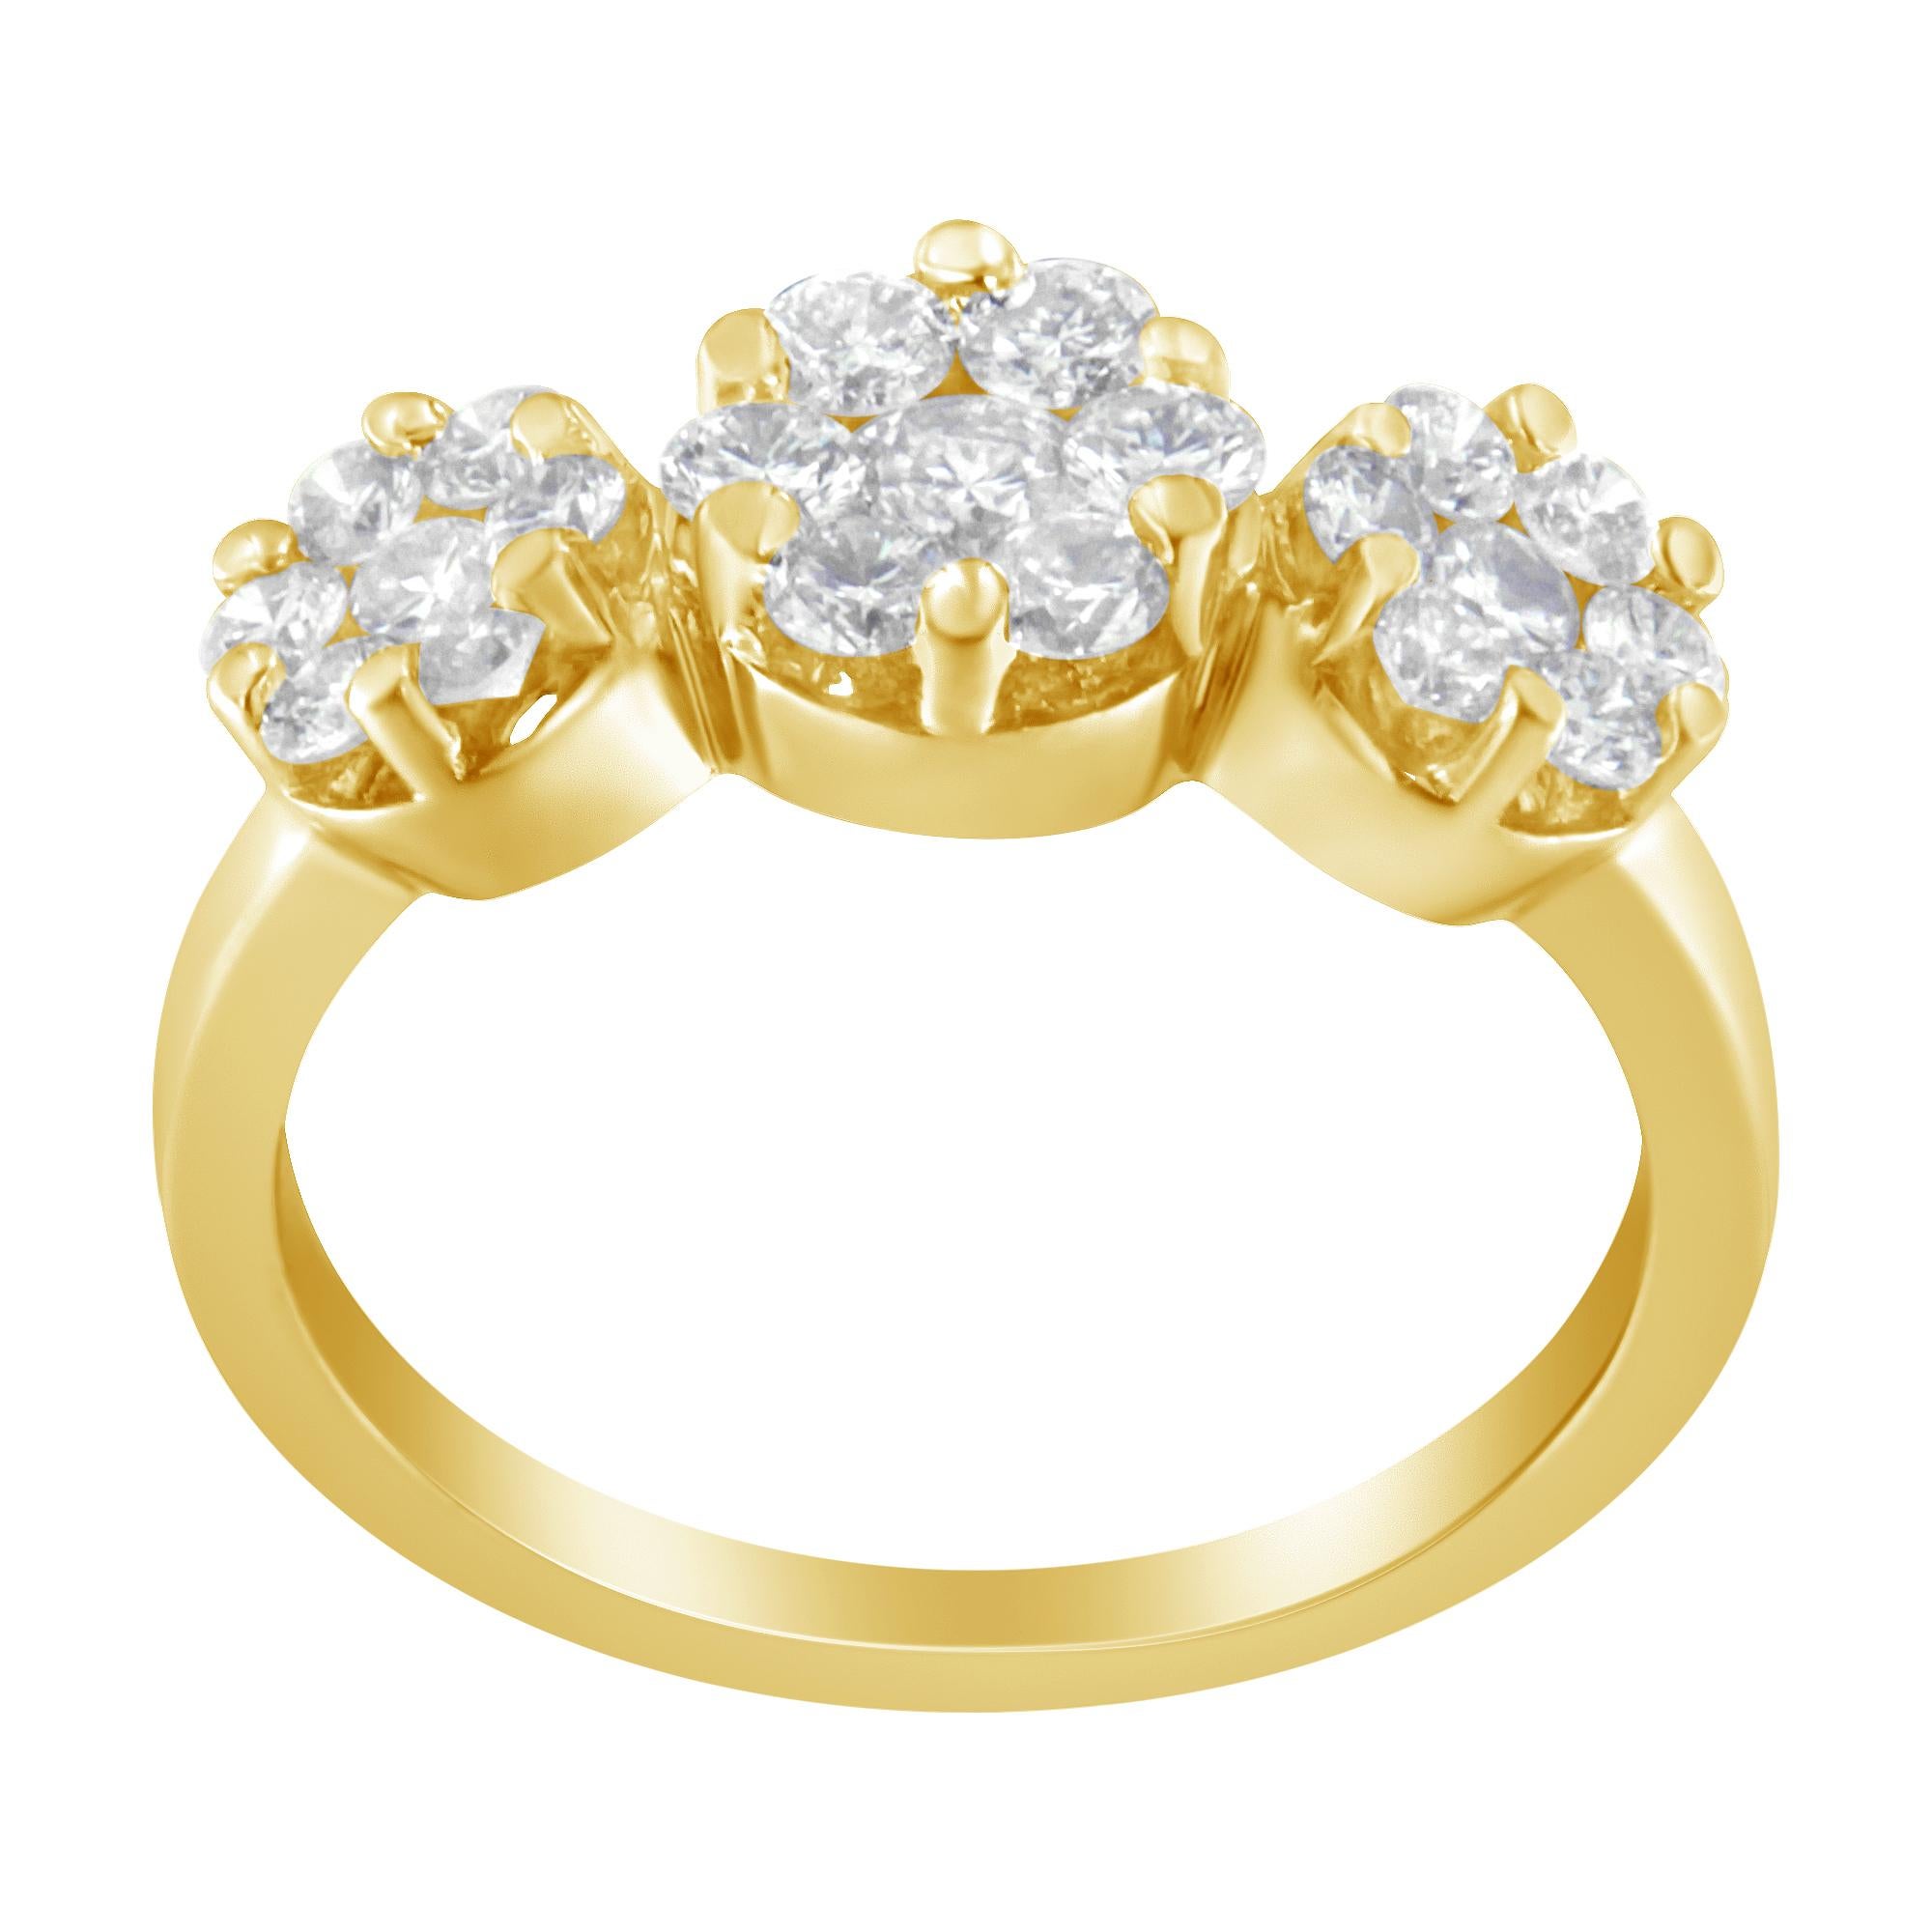 For Sale:  14K Yellow Gold 1 1/4 Carat Round-Cut Diamond Cluster Ring 2